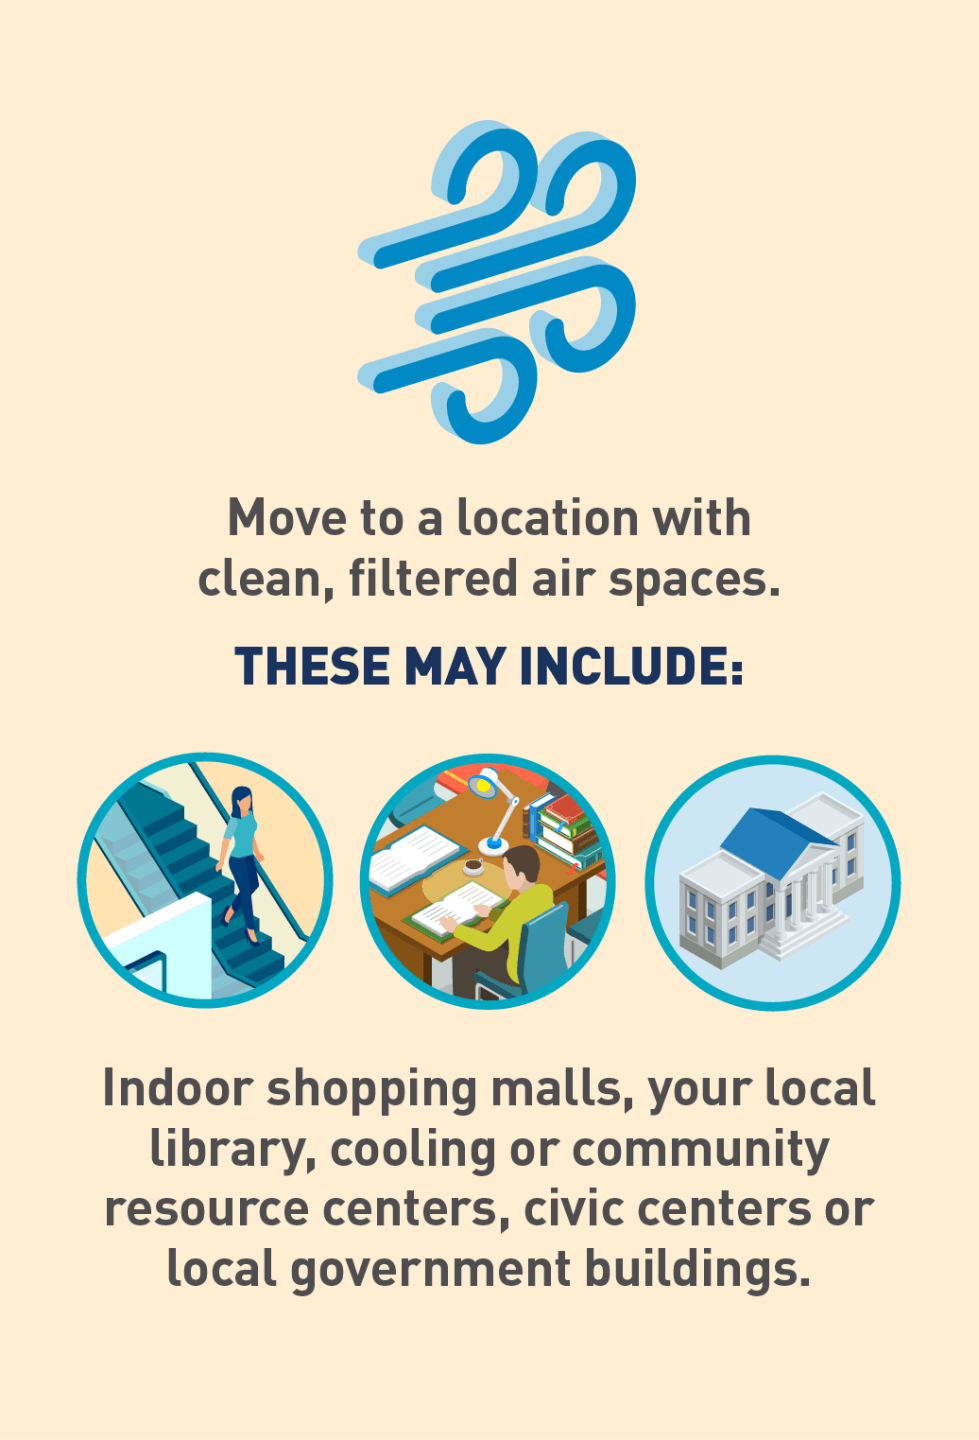 Move to a location with clean, filtered air spaces. These may include: Indoor shopping malls Local library Cooling or community resource centers Civic centers or local government buildings